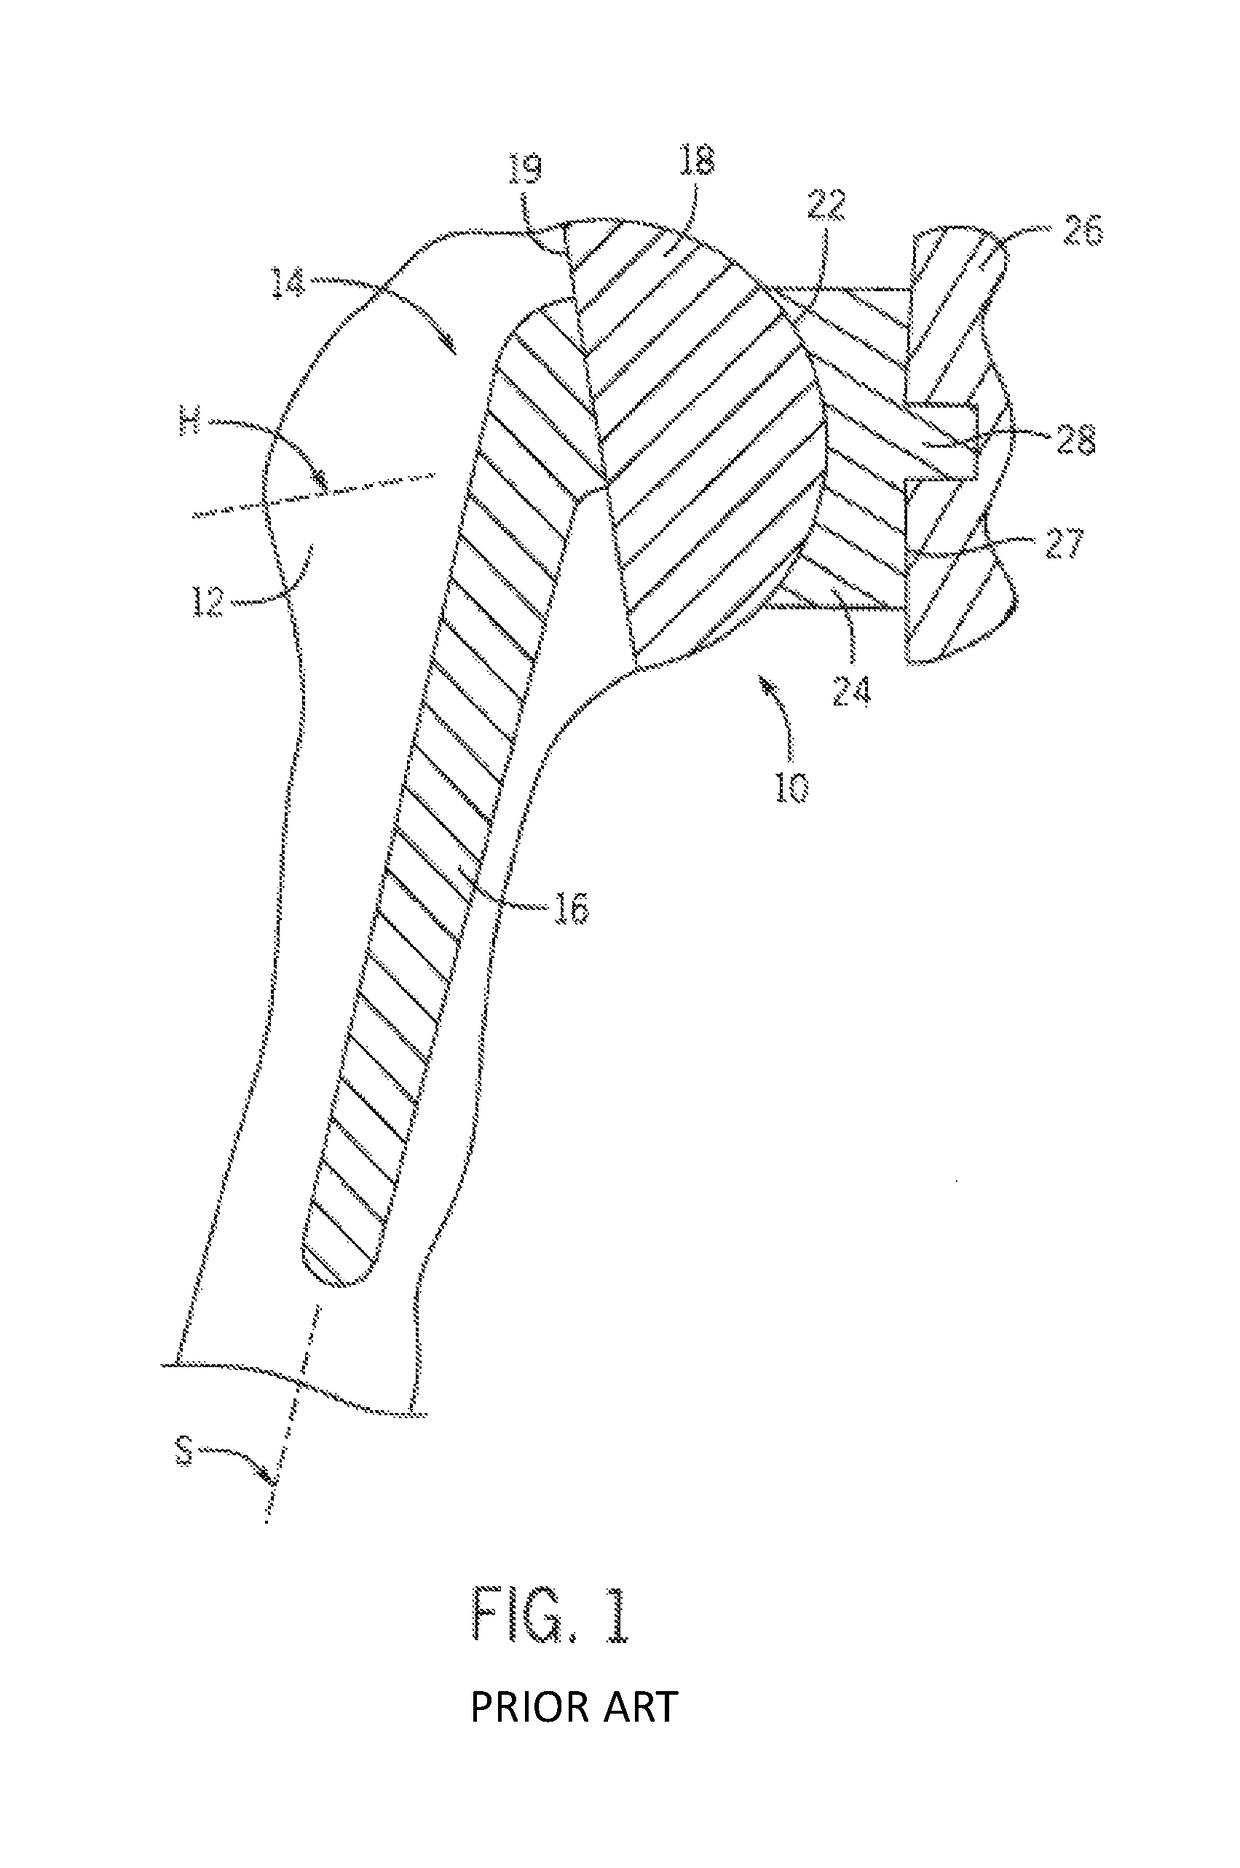 Shoulder prosthesis with variable inclination humeral head component